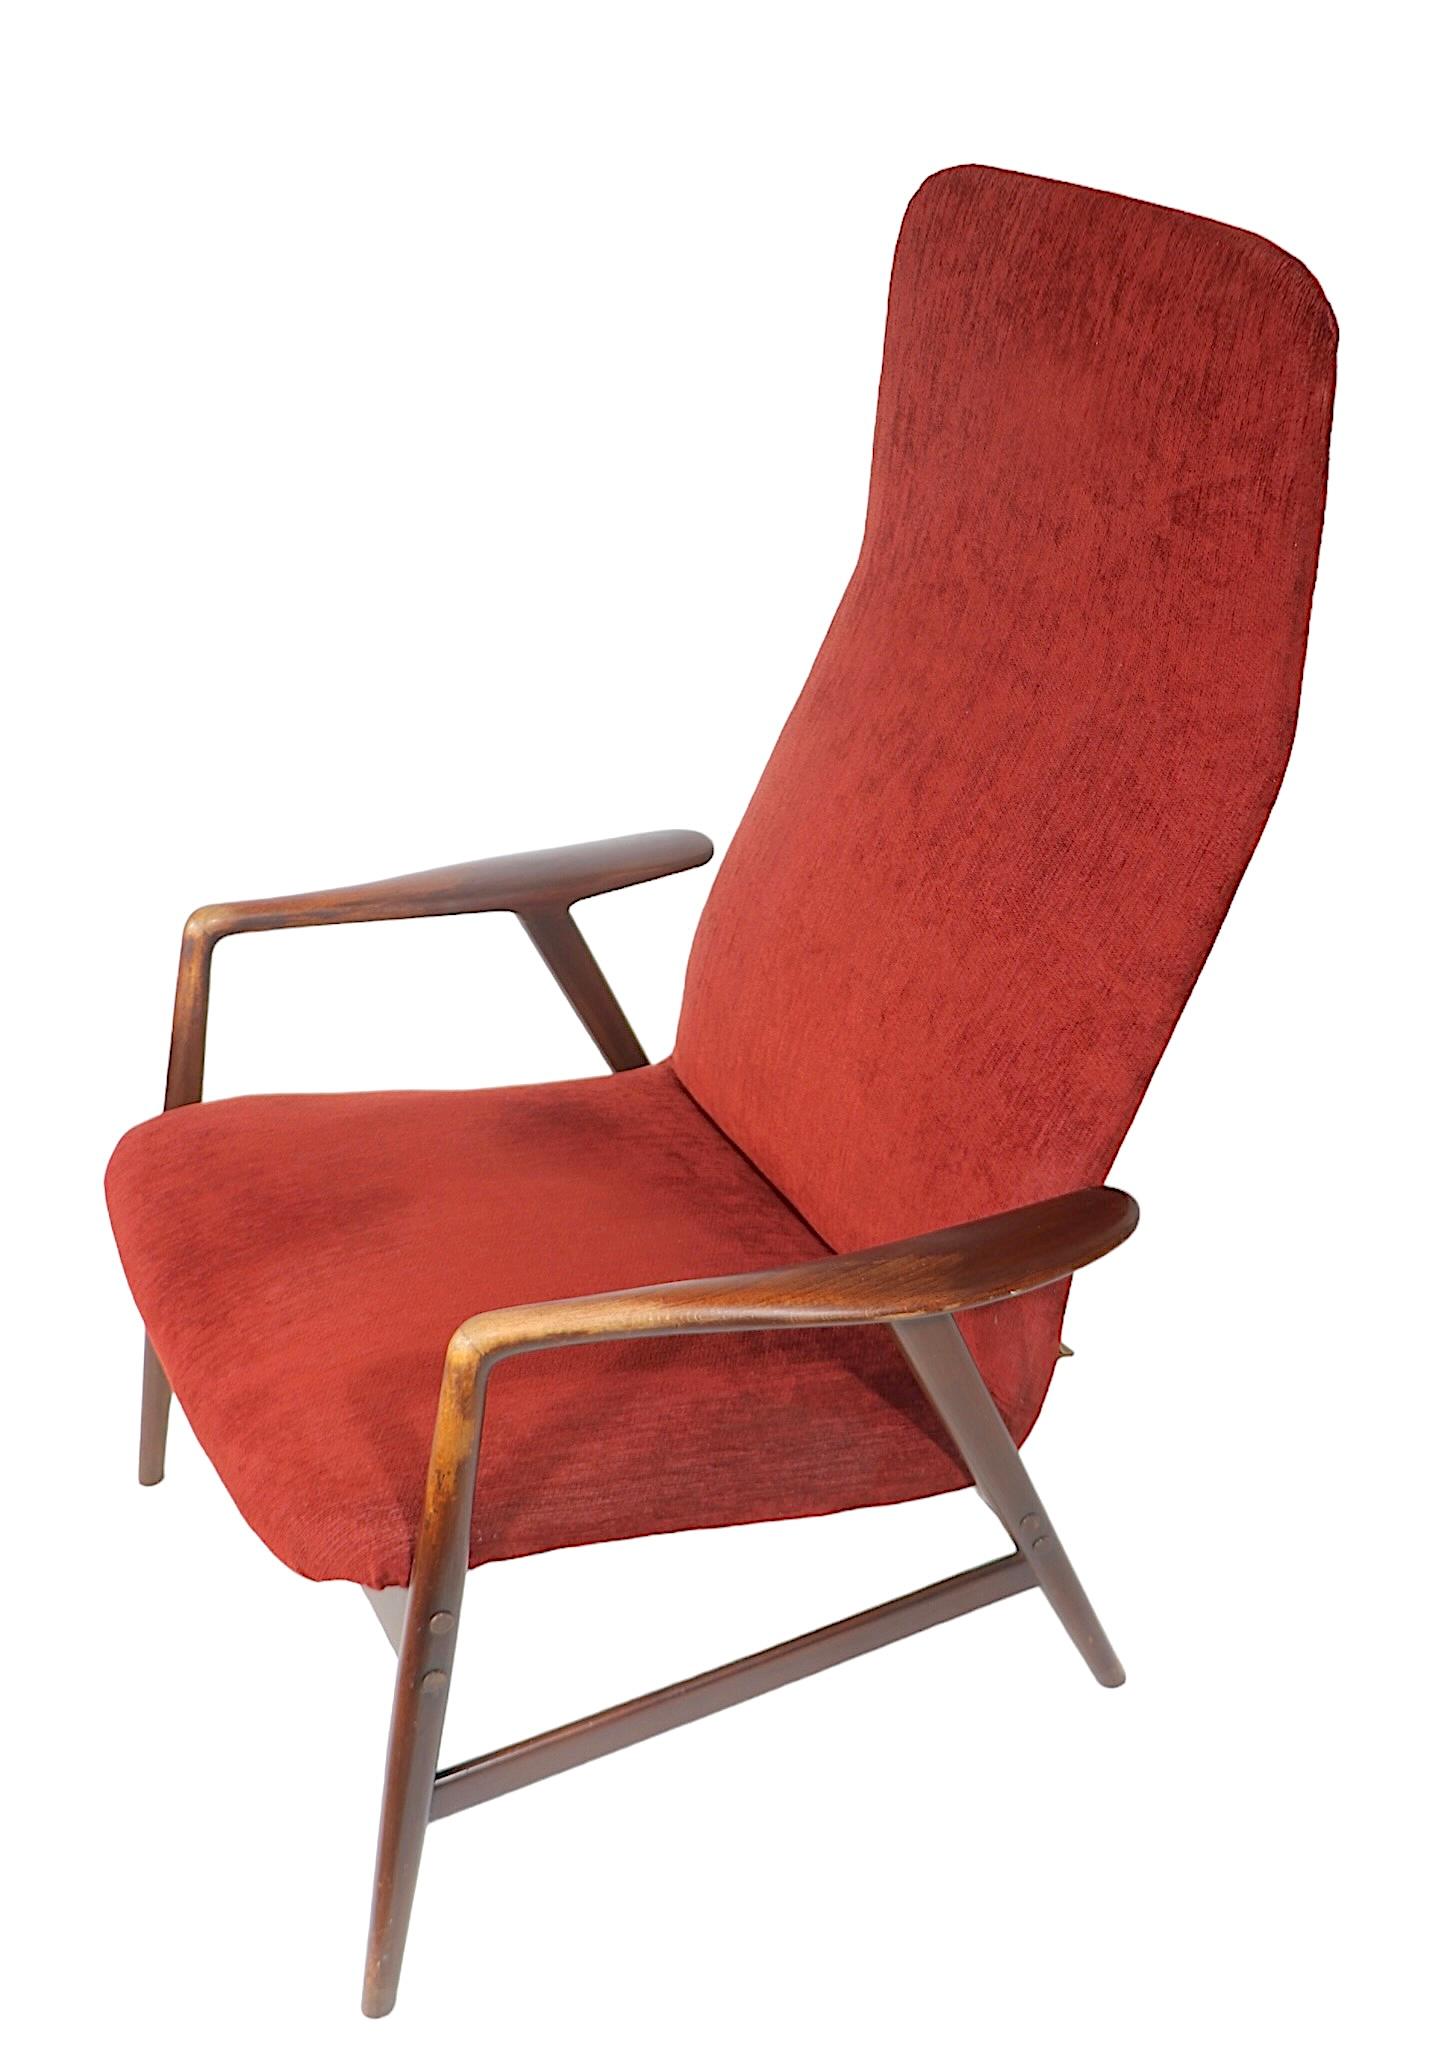 Mid Century Lounge Chair and Ottoman by Alf Svensson for Fritz Hansen c. 1960's For Sale 1